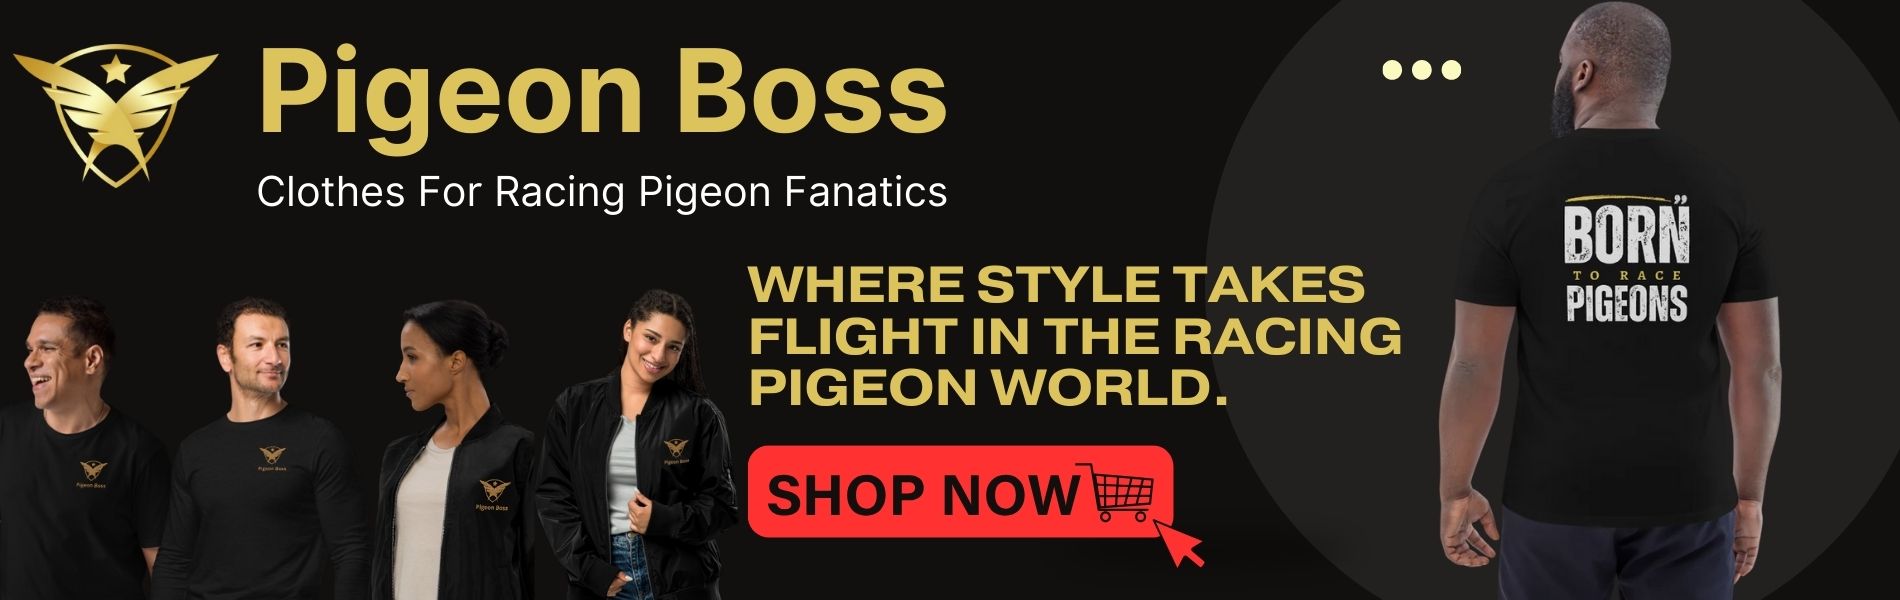 Pigeon boss clothes banner 1200 x 628 px 1900 x 600 px